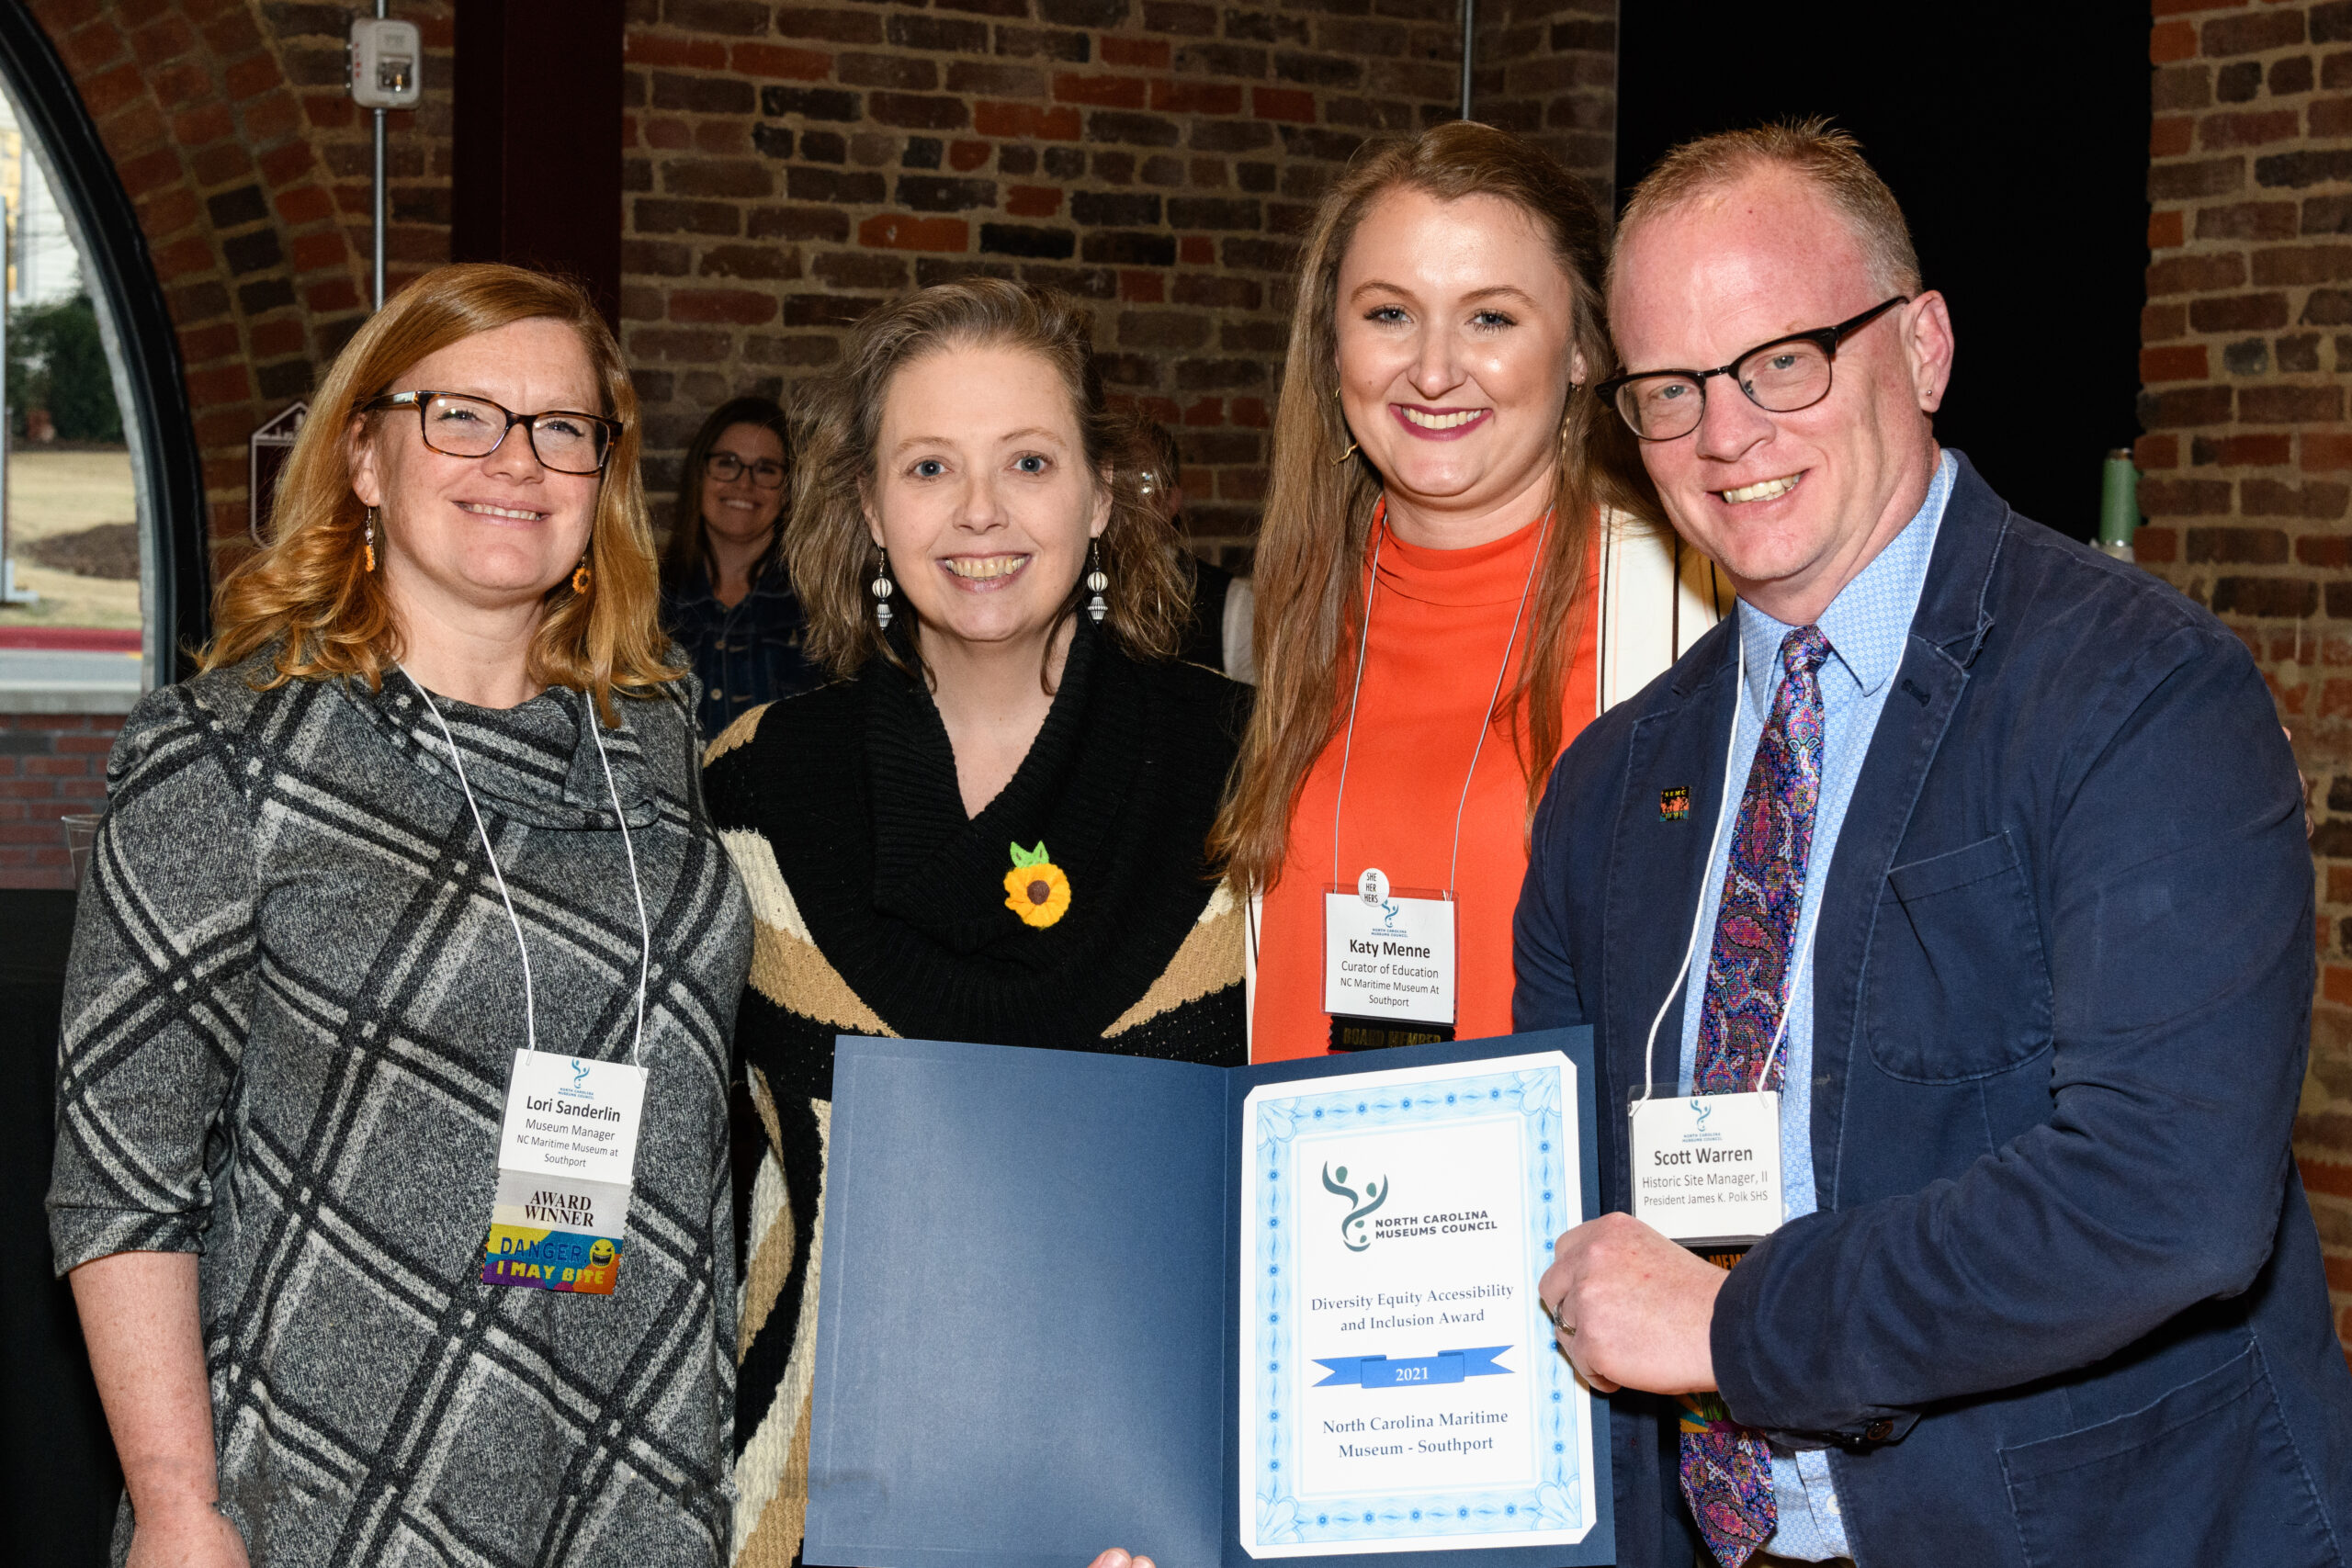 Lori Sanderlin (left) and Katy Menne (second from right) receive the Maritime Museum’s award from Council awards chair LeRae Umfleet and former president Scott Warren.